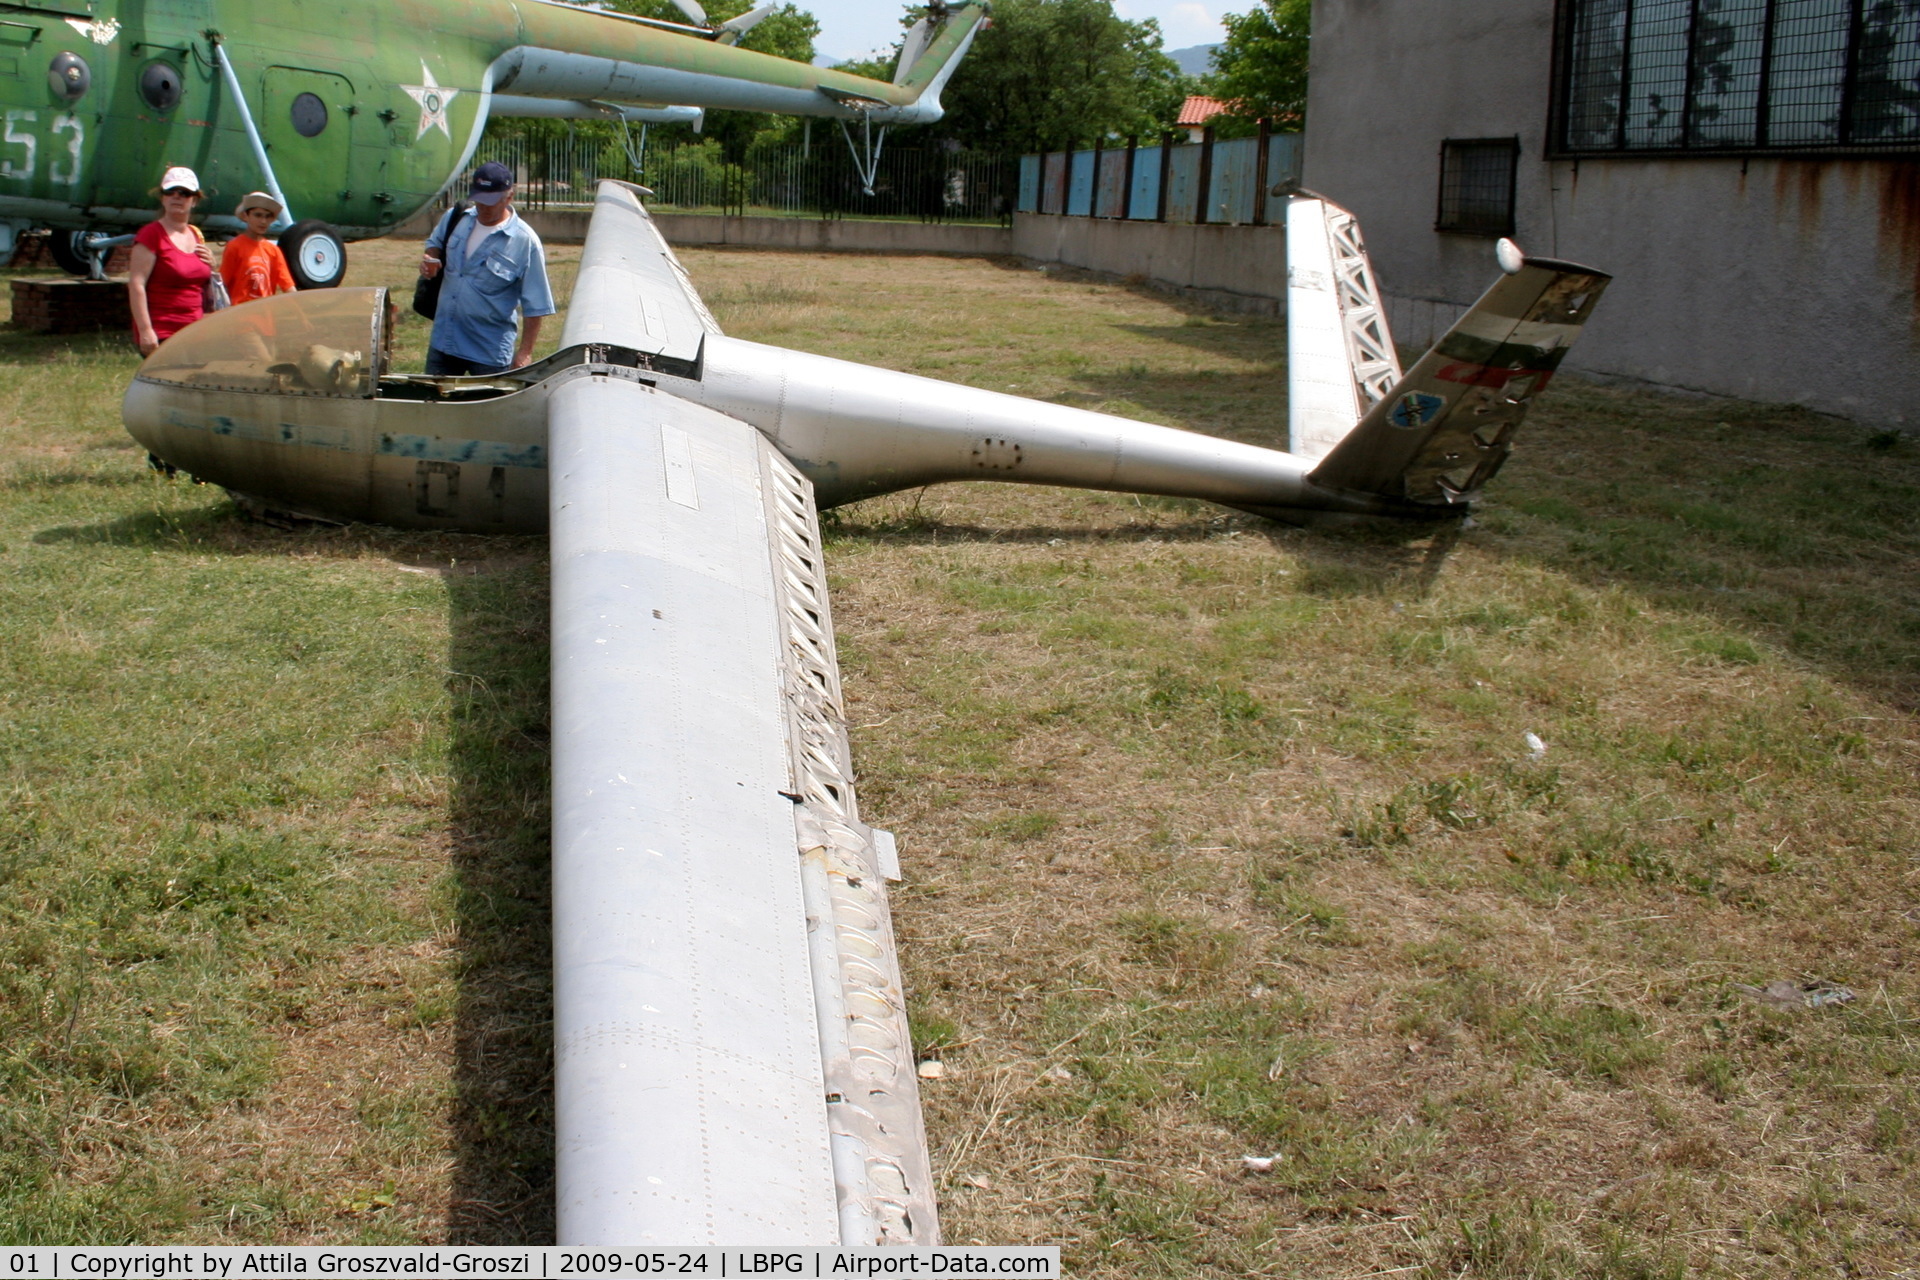 01, Antonov A-11 C/N Not found 01, Bulgarian Museum of Aviation, Plovdiv-Krumovo (LBPG).With the sticker of the helper organization of the protection his control surface.